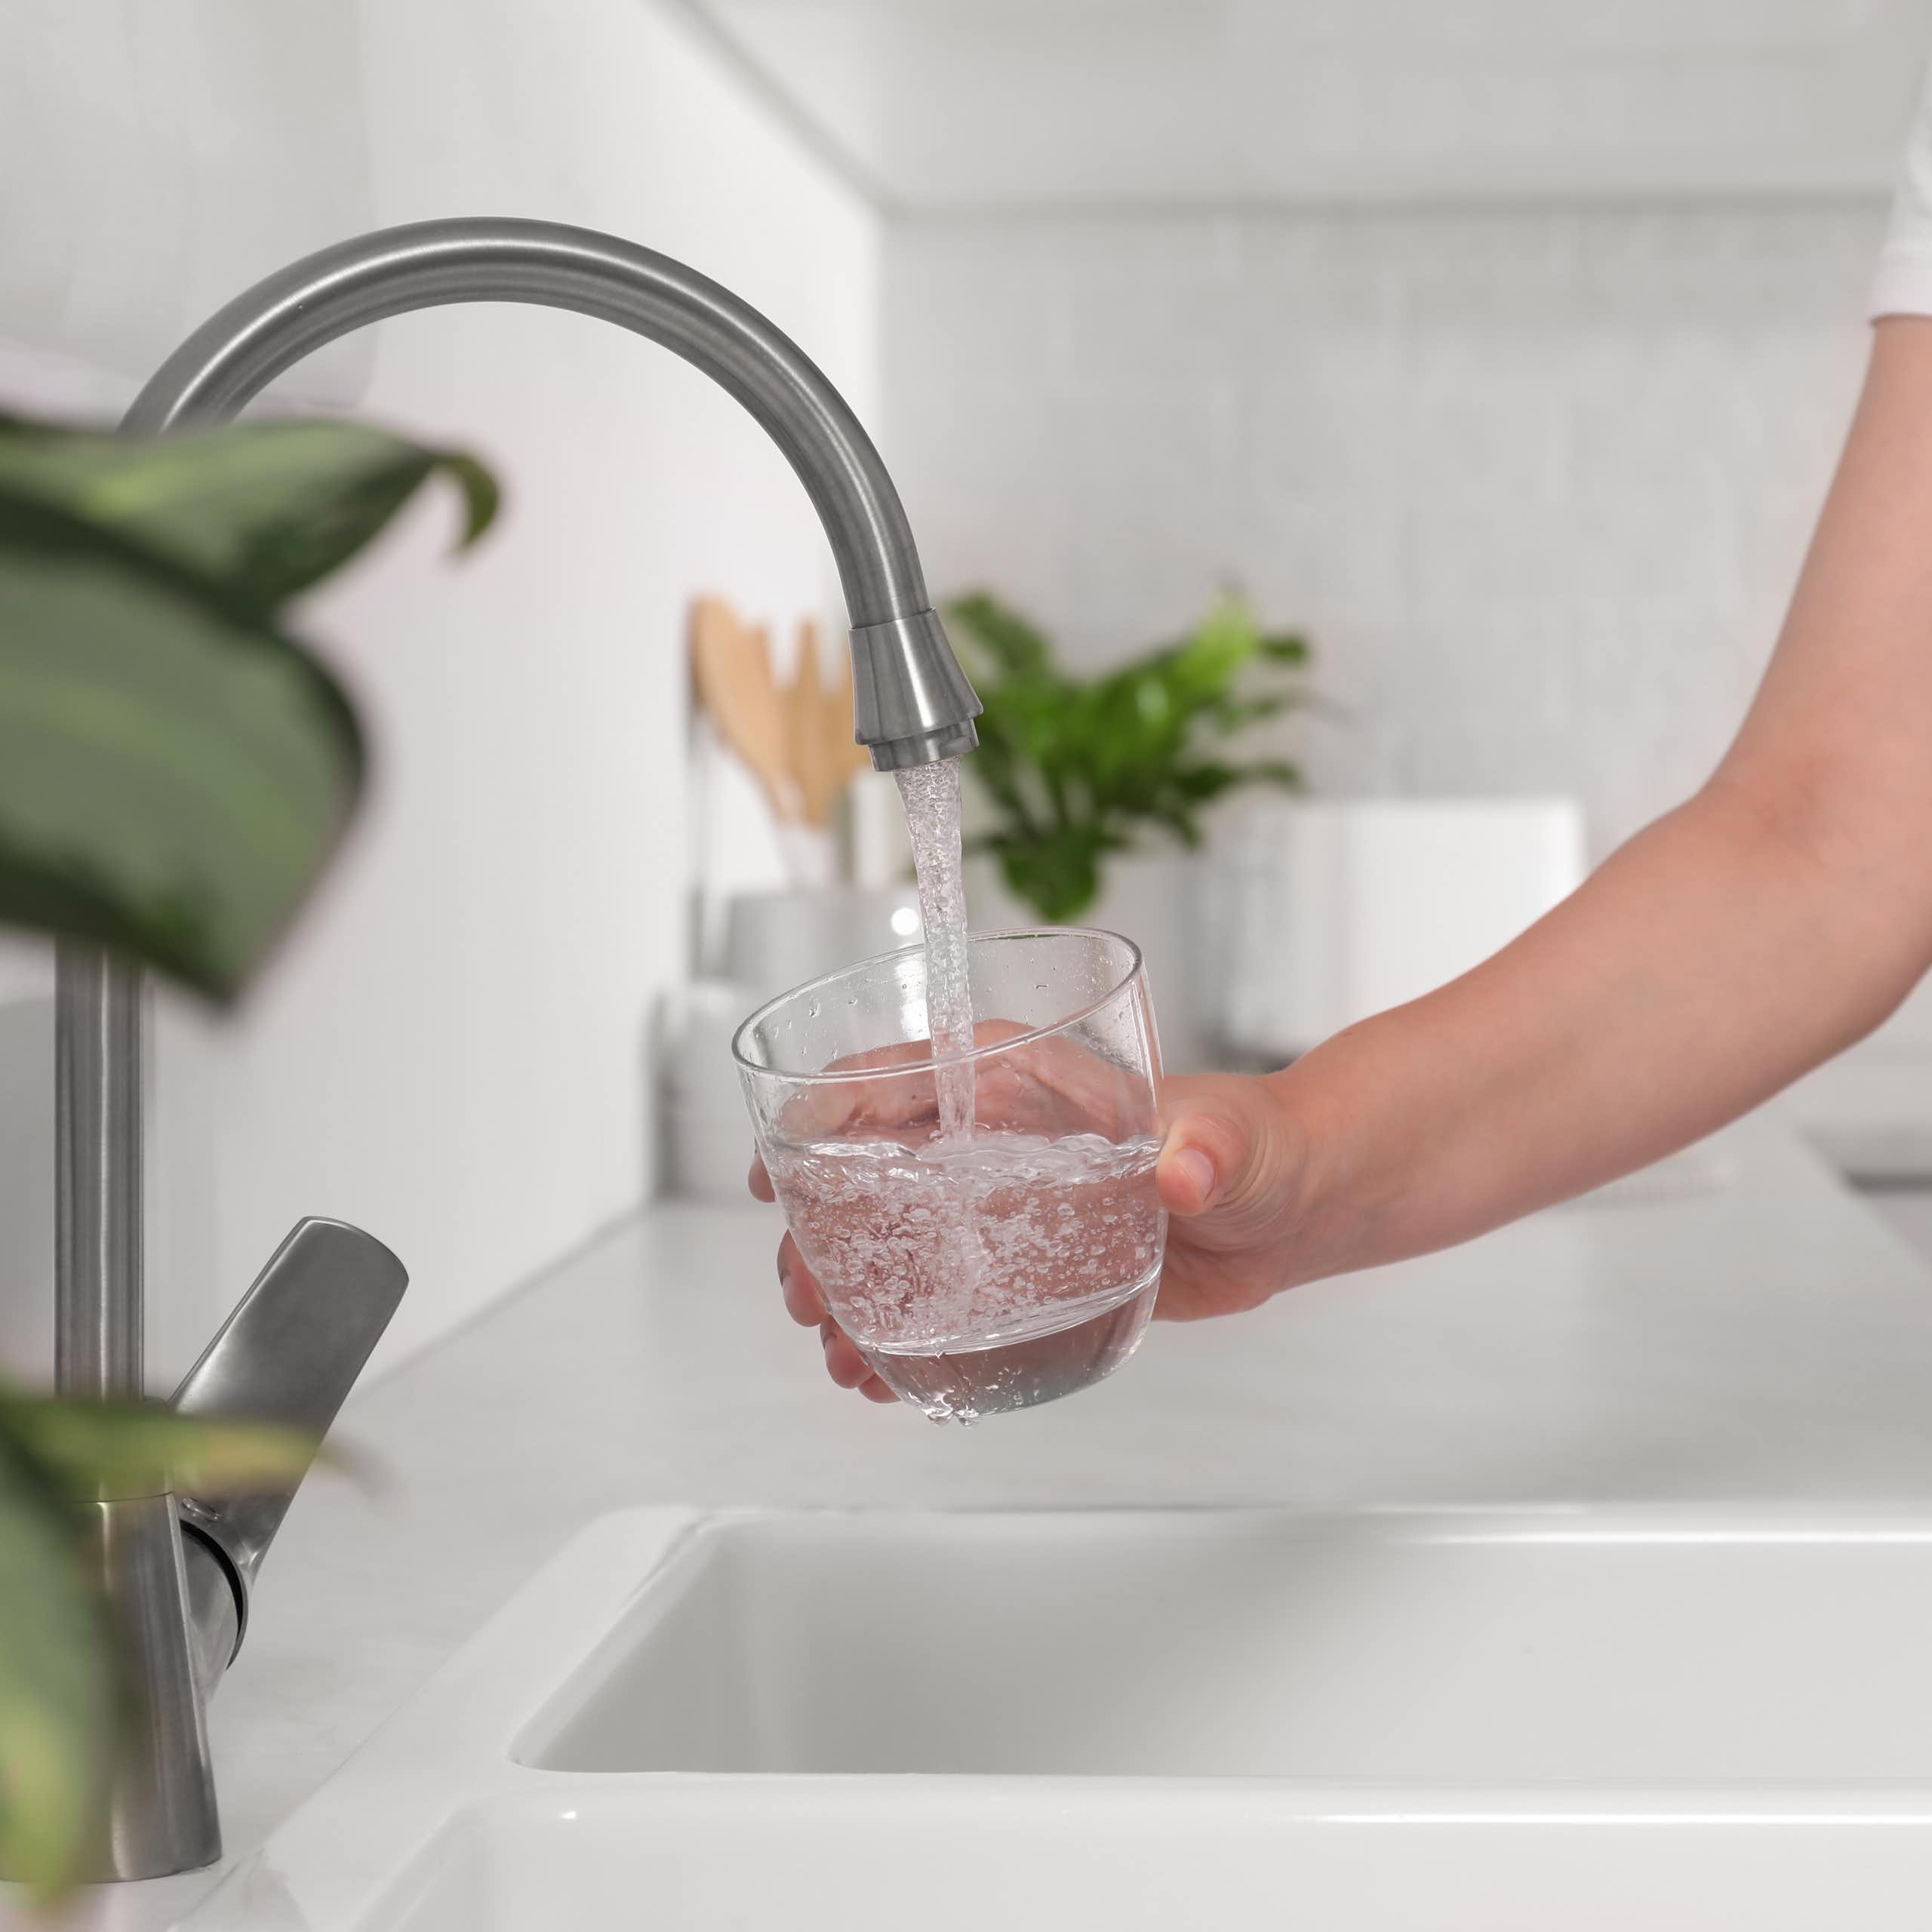 Worried about PFAS in your drinking water? Here’s what the evidence says about home filters